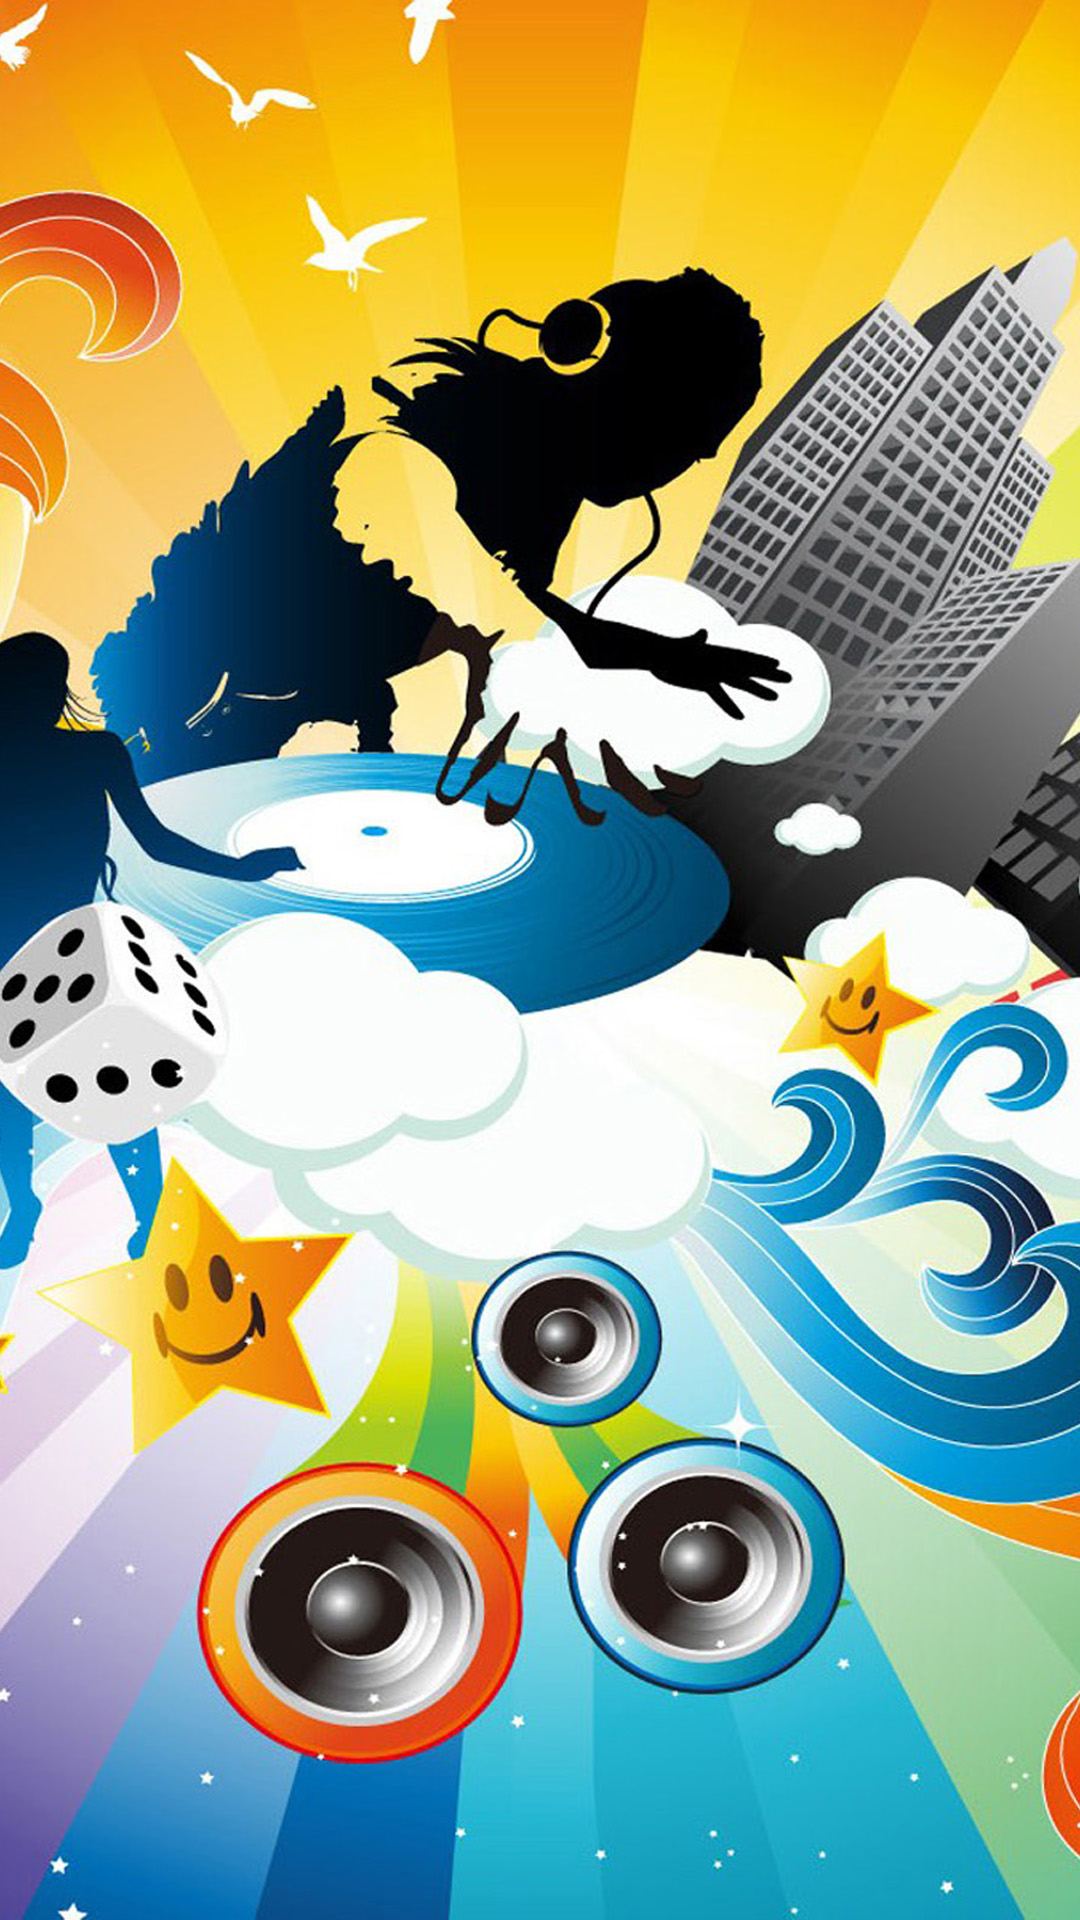 hd music wallpapers for android,illustration,graphic design,art,animated cartoon,clip art